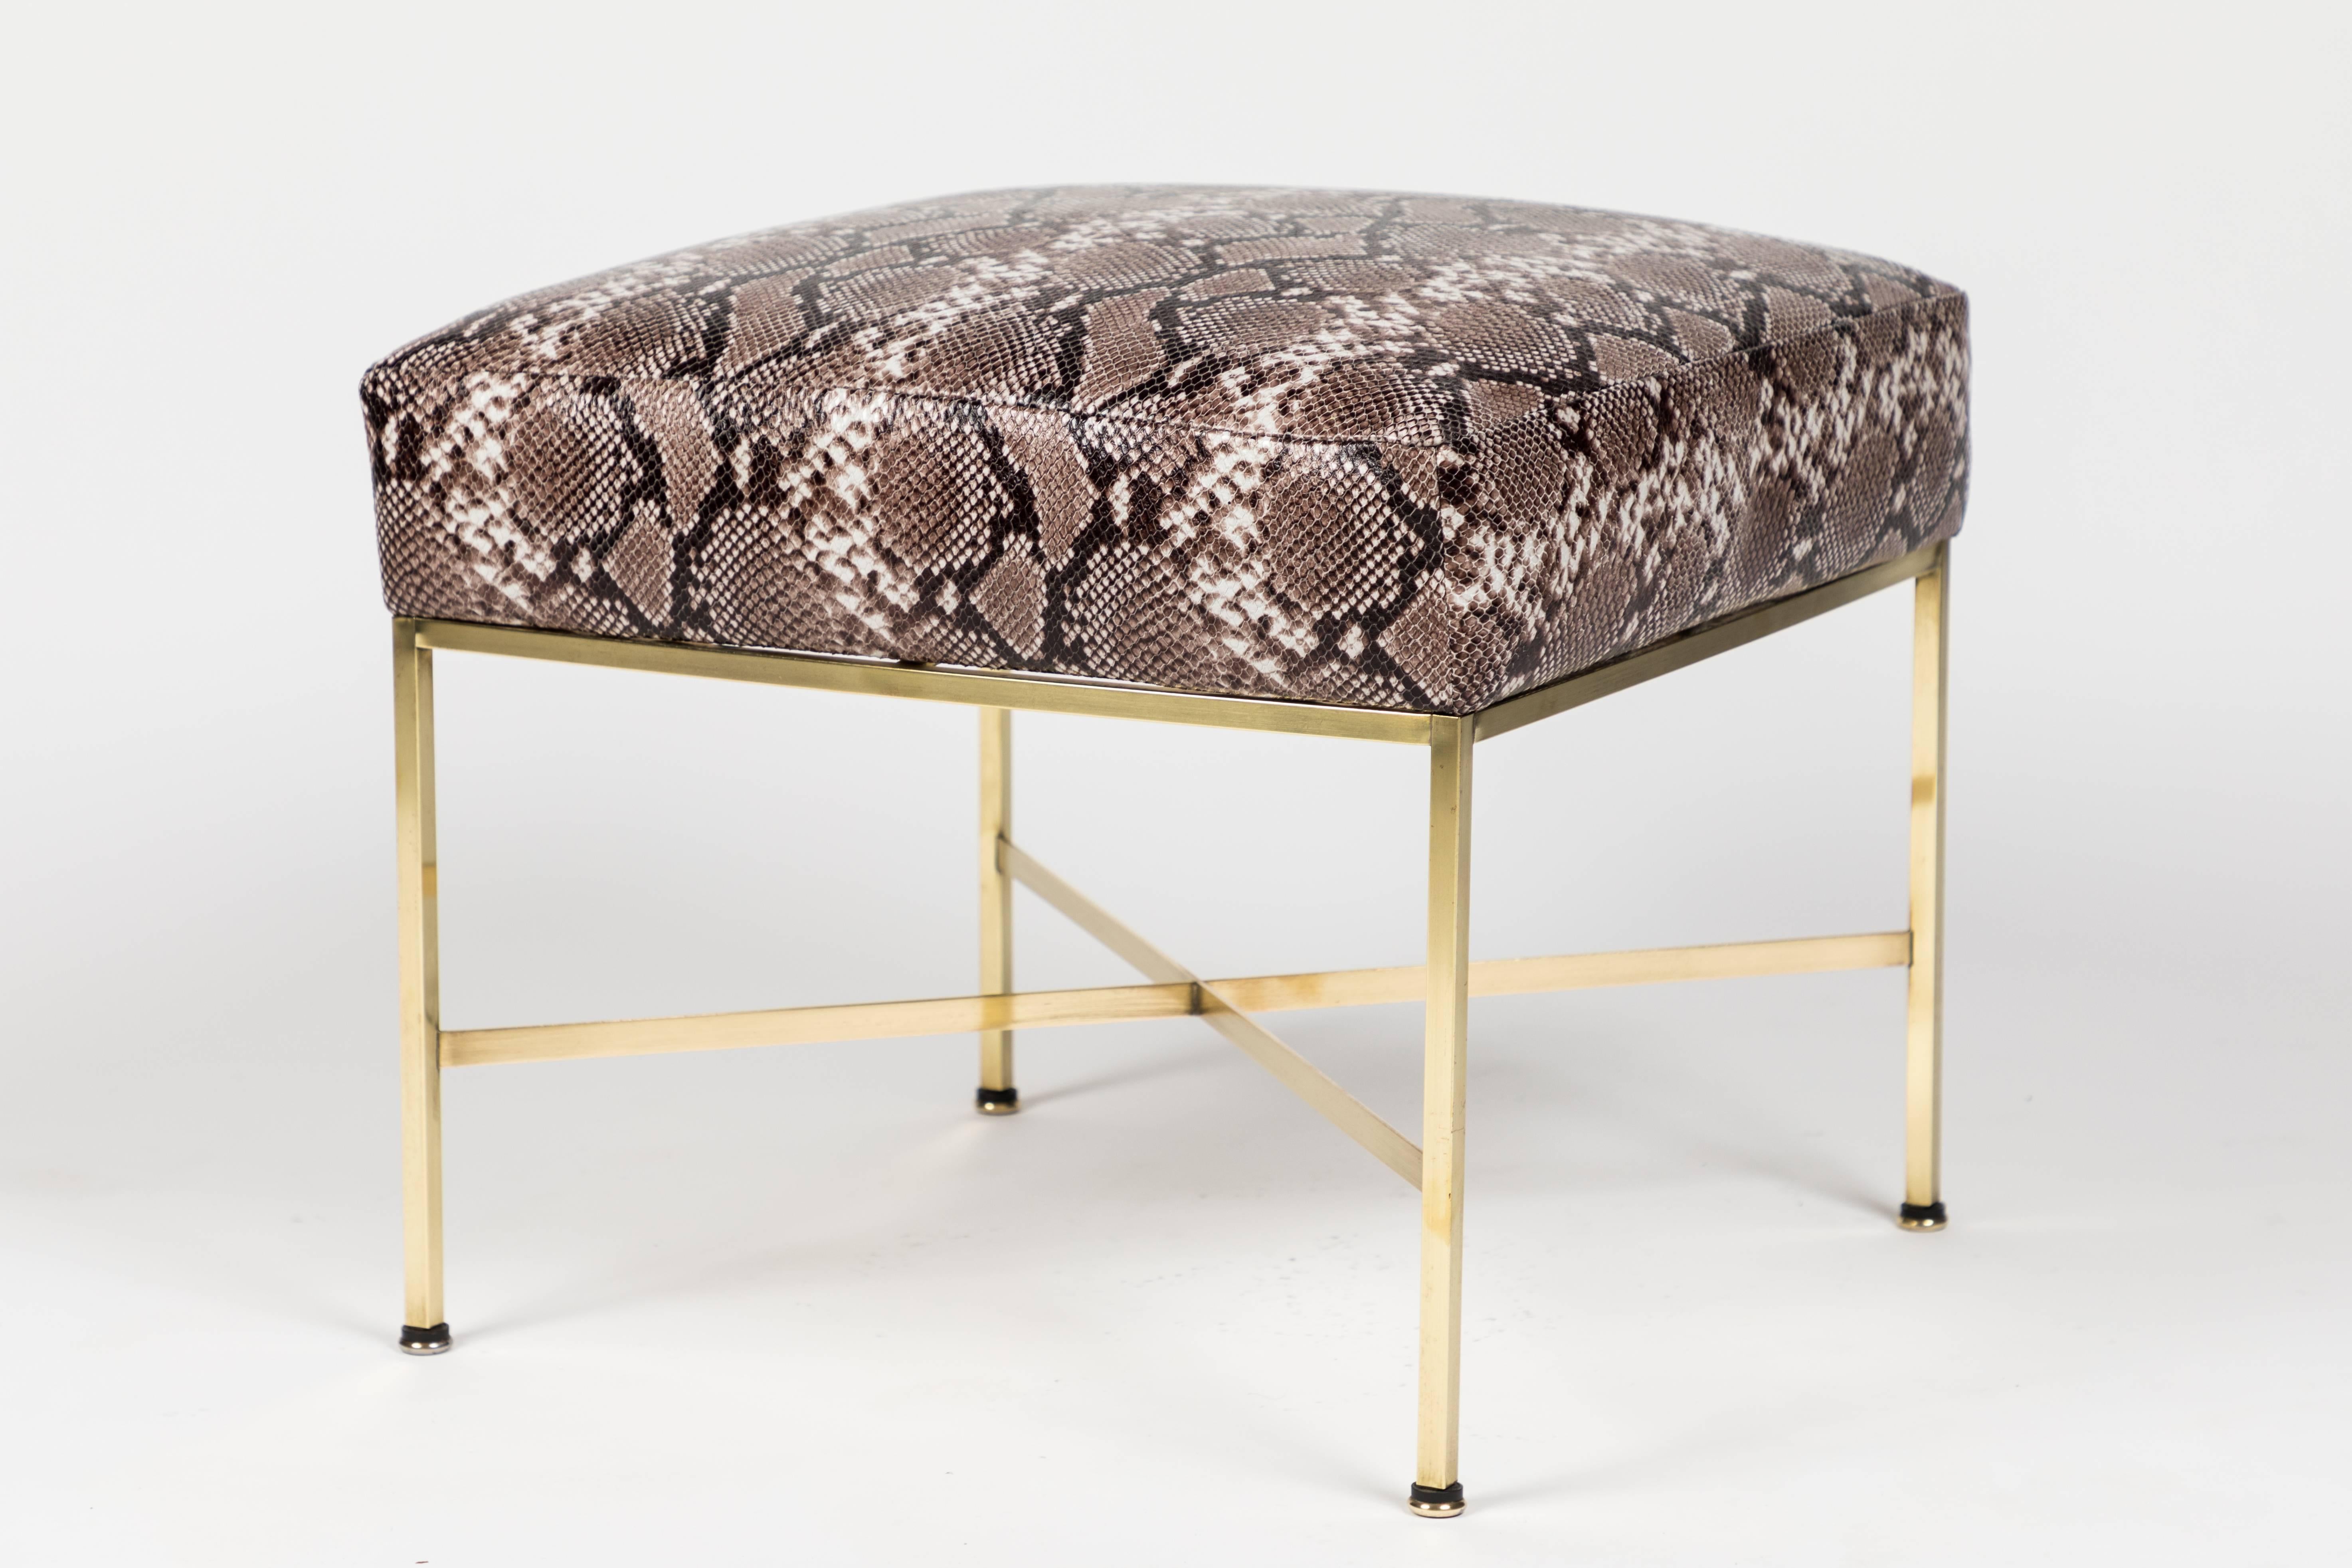 A Classic design, this simple brass X-base stools have been reupholstered in a realistic embossed and printed leather imitating Python. Stools would work perfectly in any number of style interiors.
 